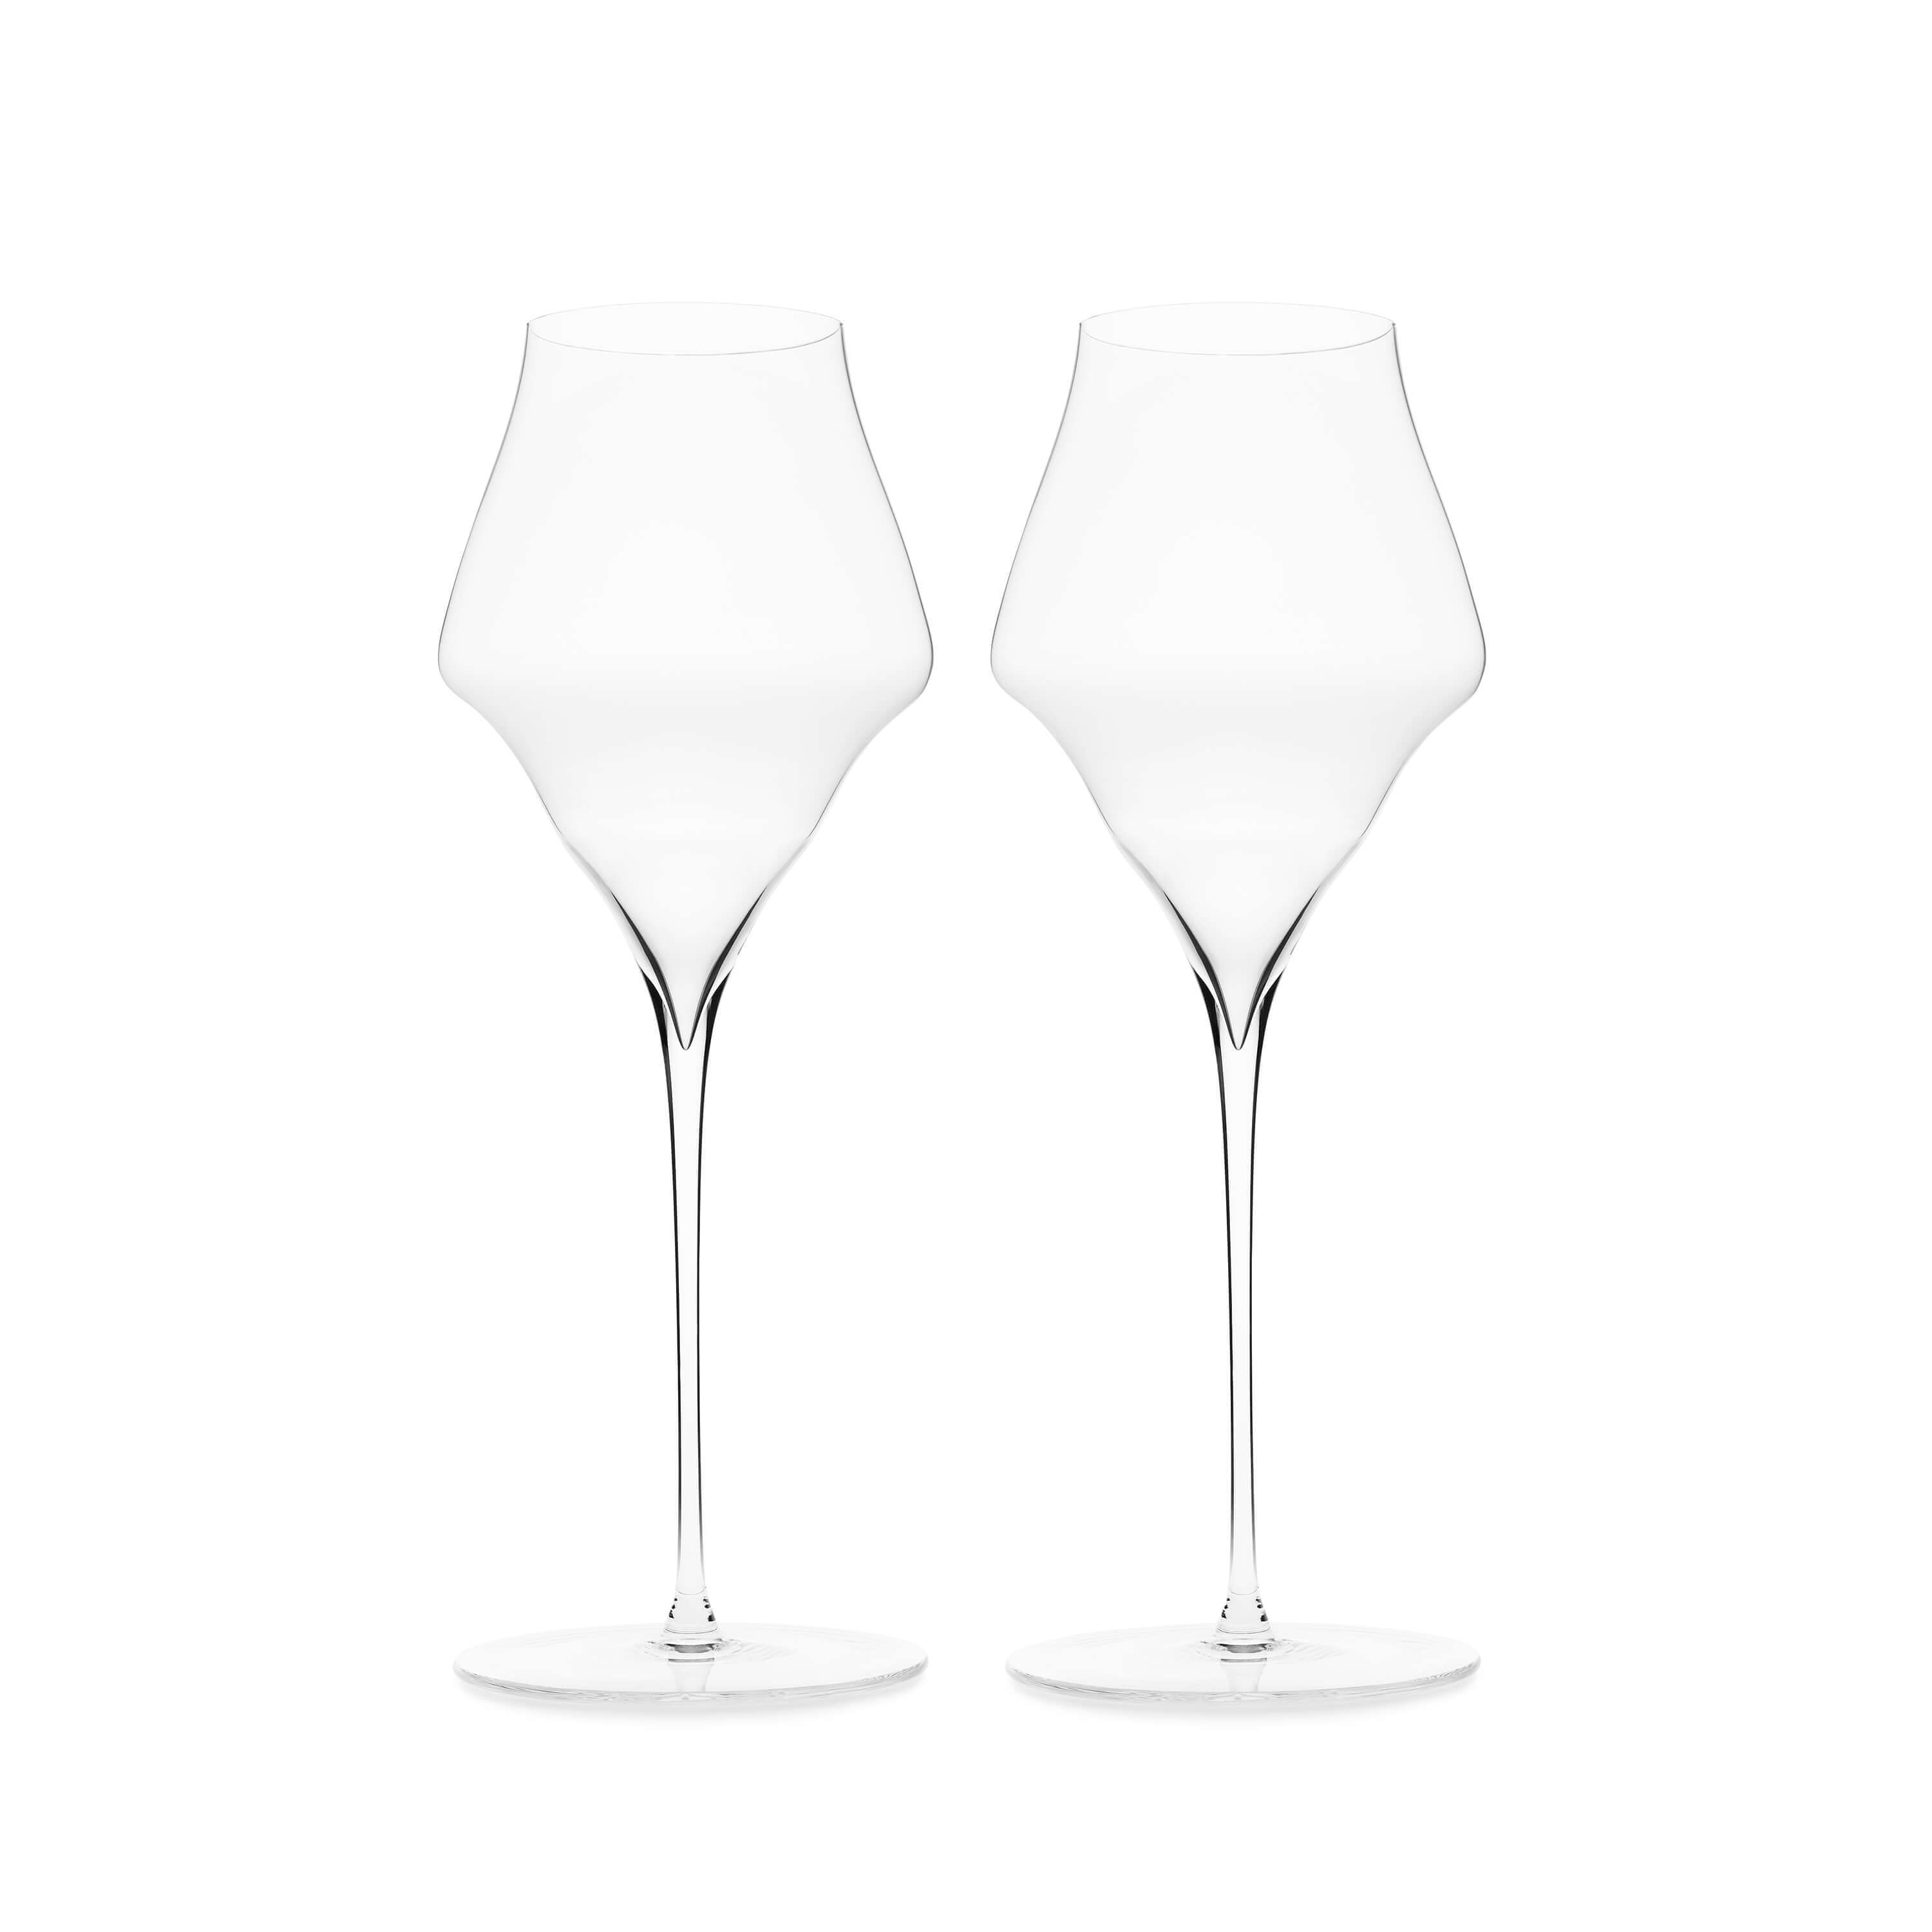 Two champagne glasses by Josephinenhütte